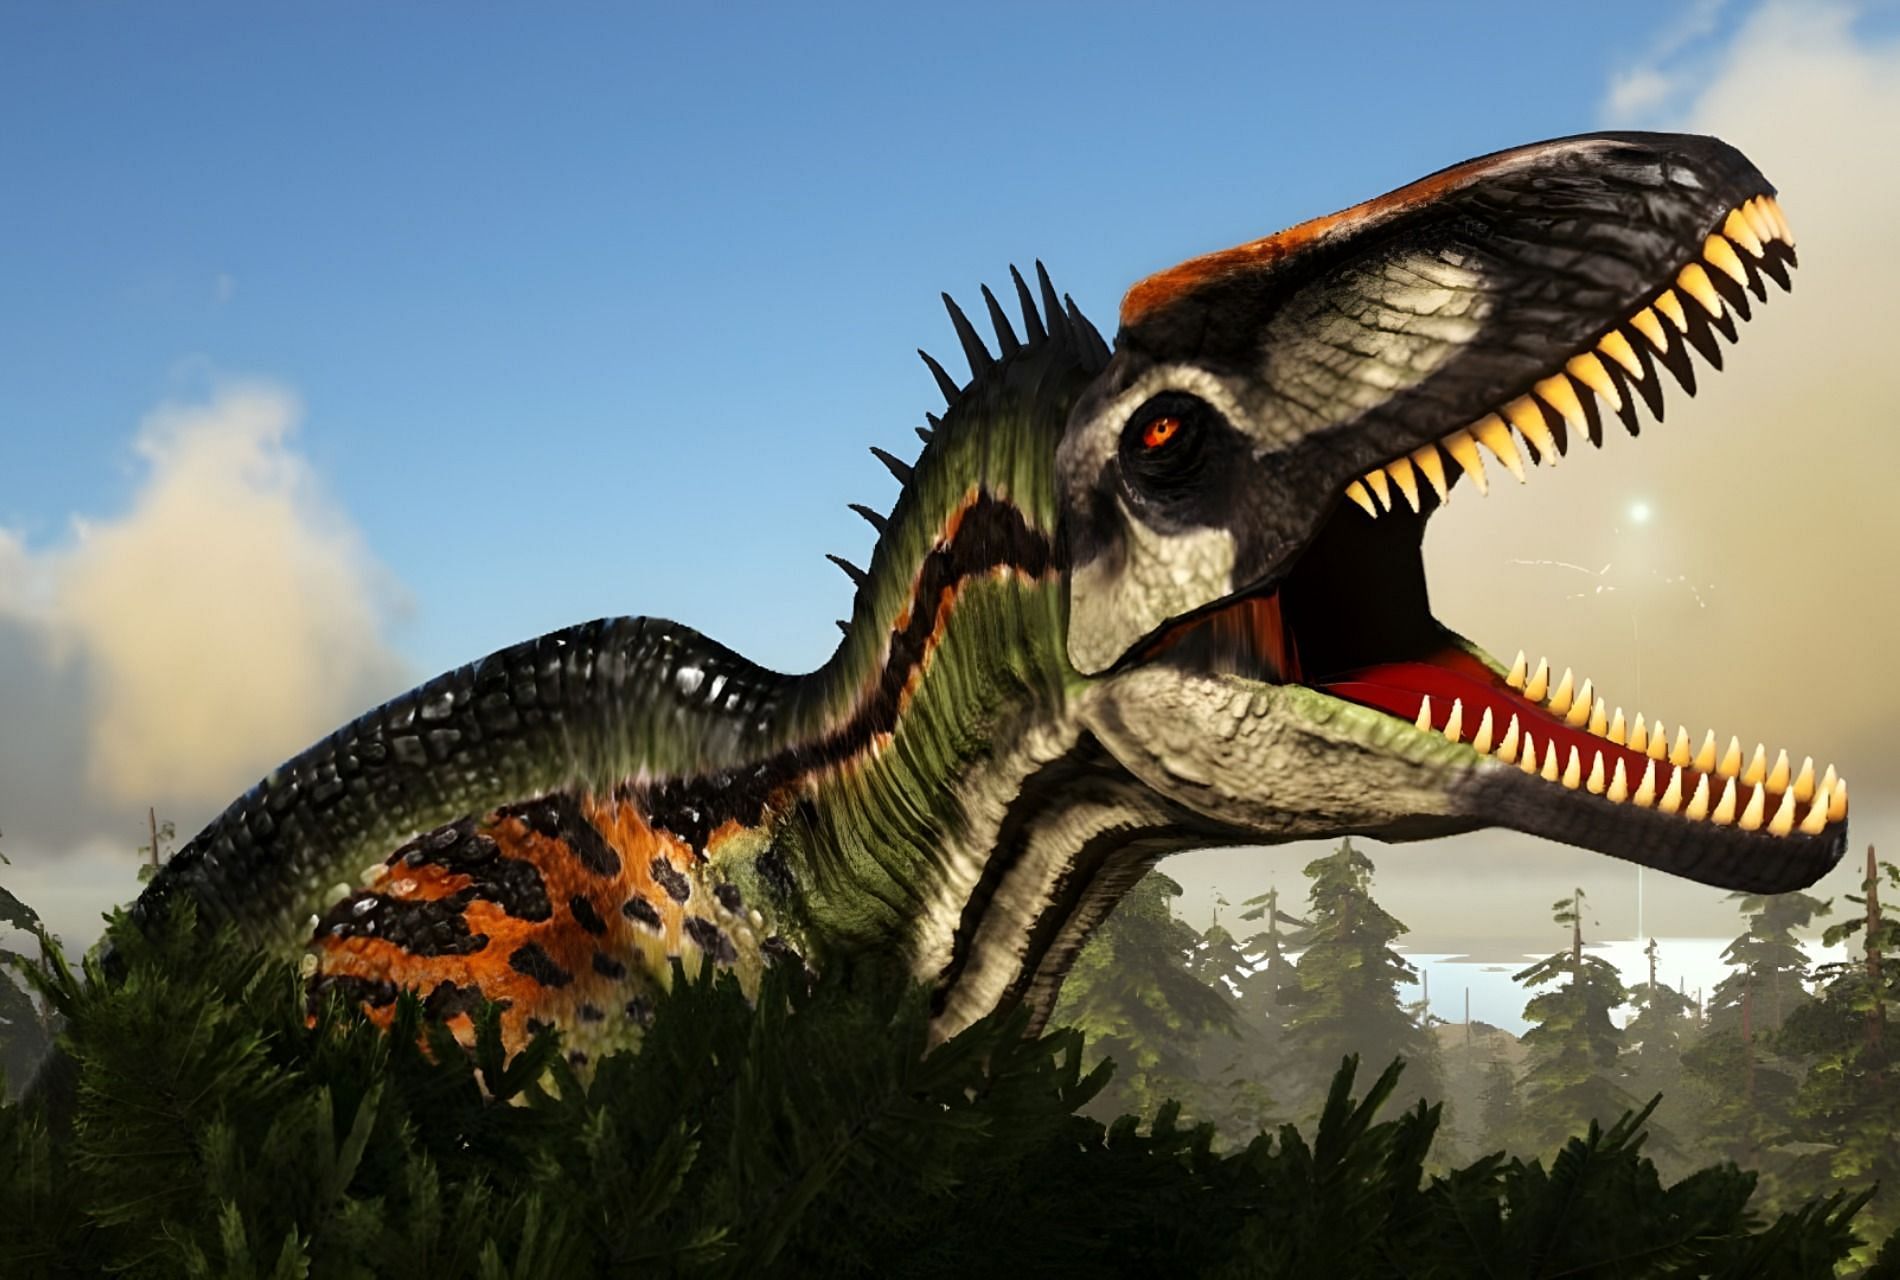 Acrocanthosaurus is an add-on dino that comes with one of the Ark mods (Image via ark wiki)